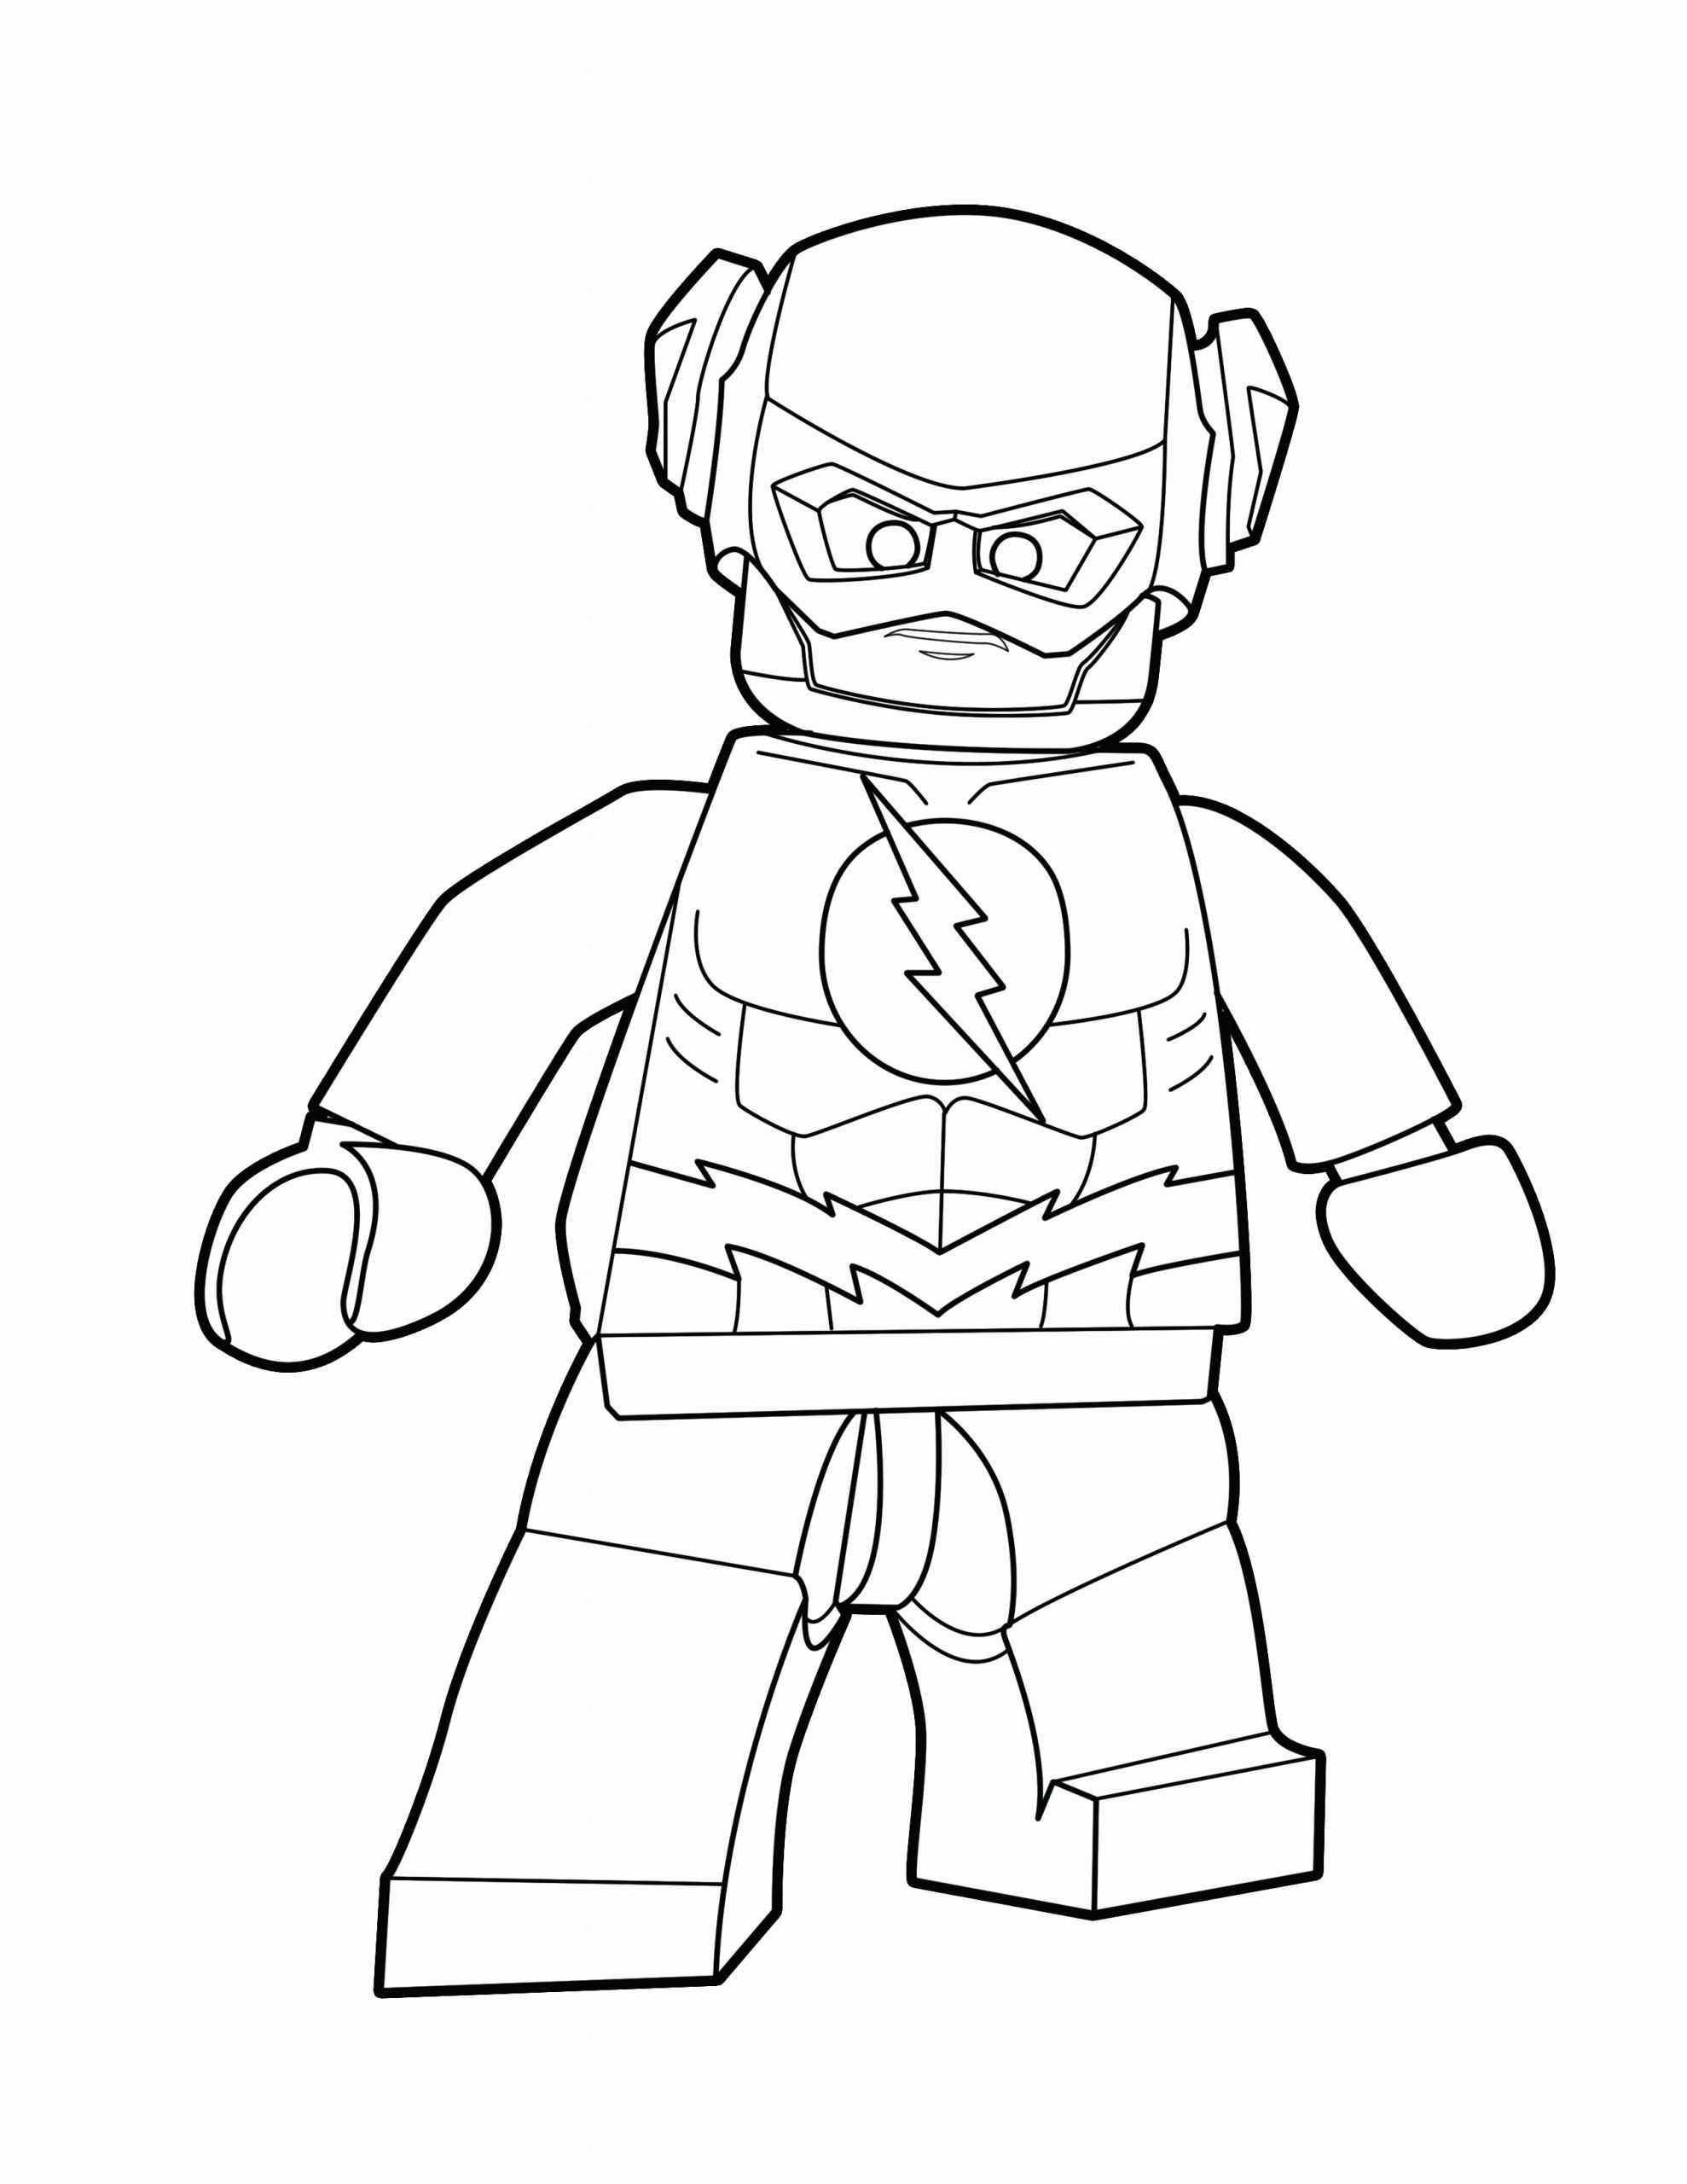 Lego Flash Coloring Pages